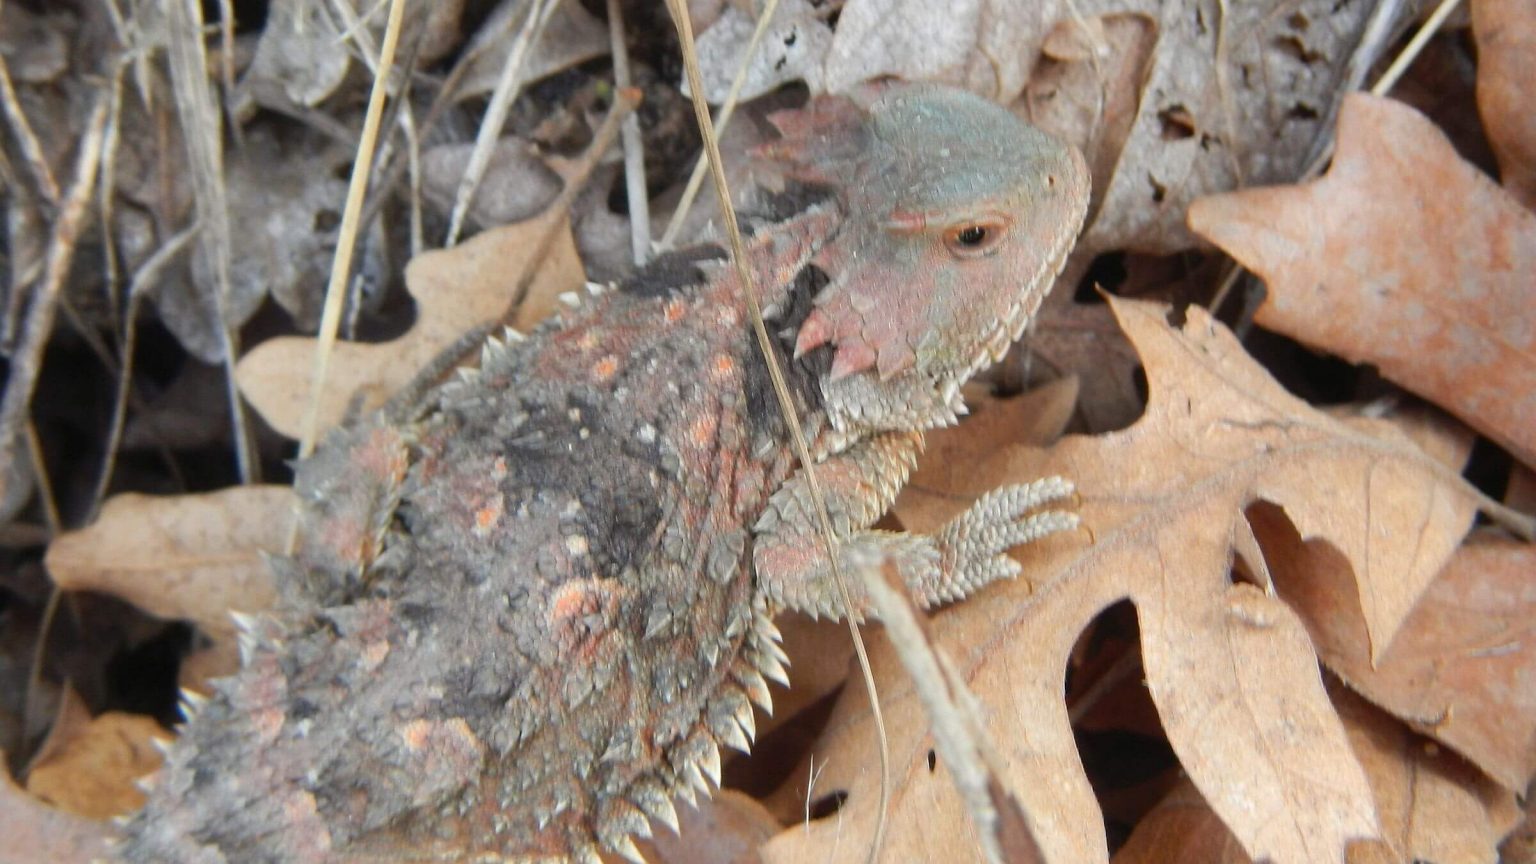 Four Peaks Wilderness, backpacking, horned toad lizard, April